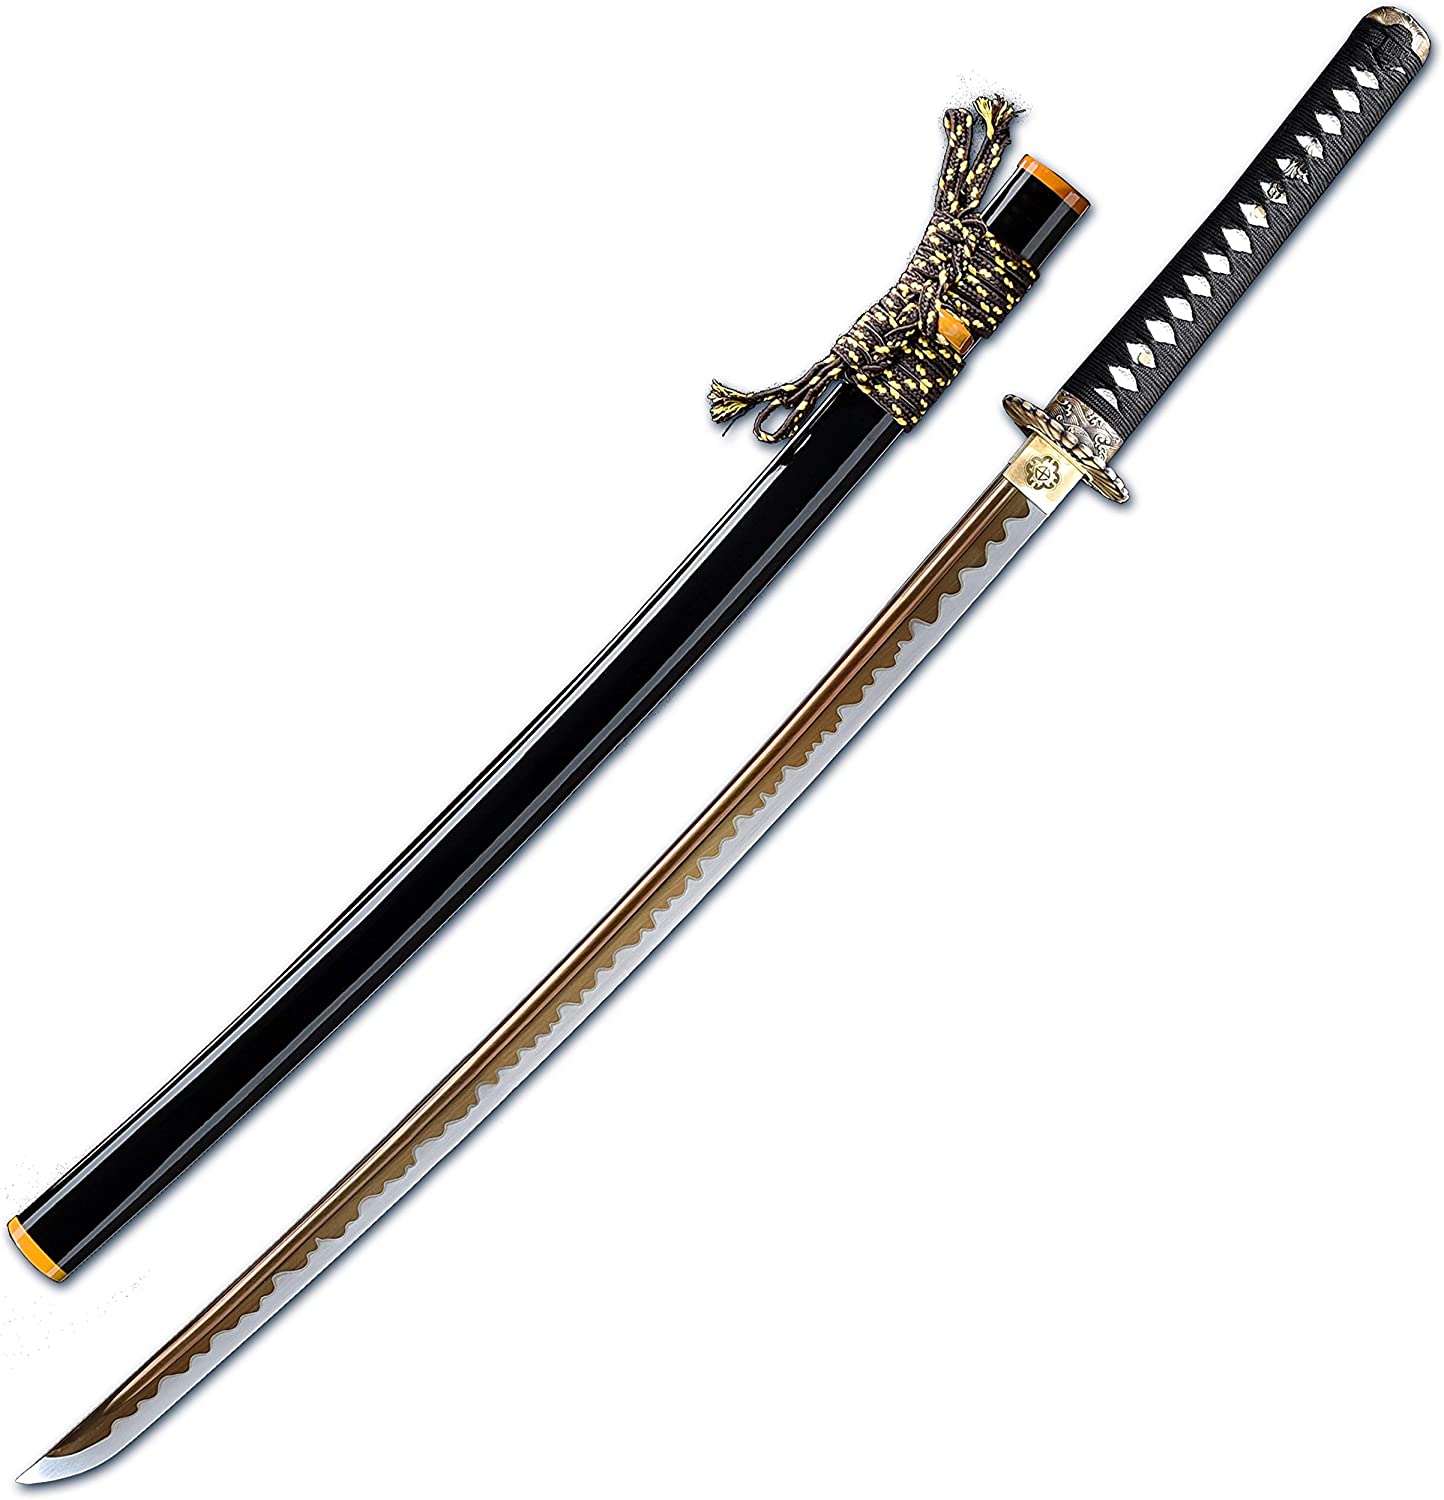 Detail Picture Of A Katana Sword Nomer 11